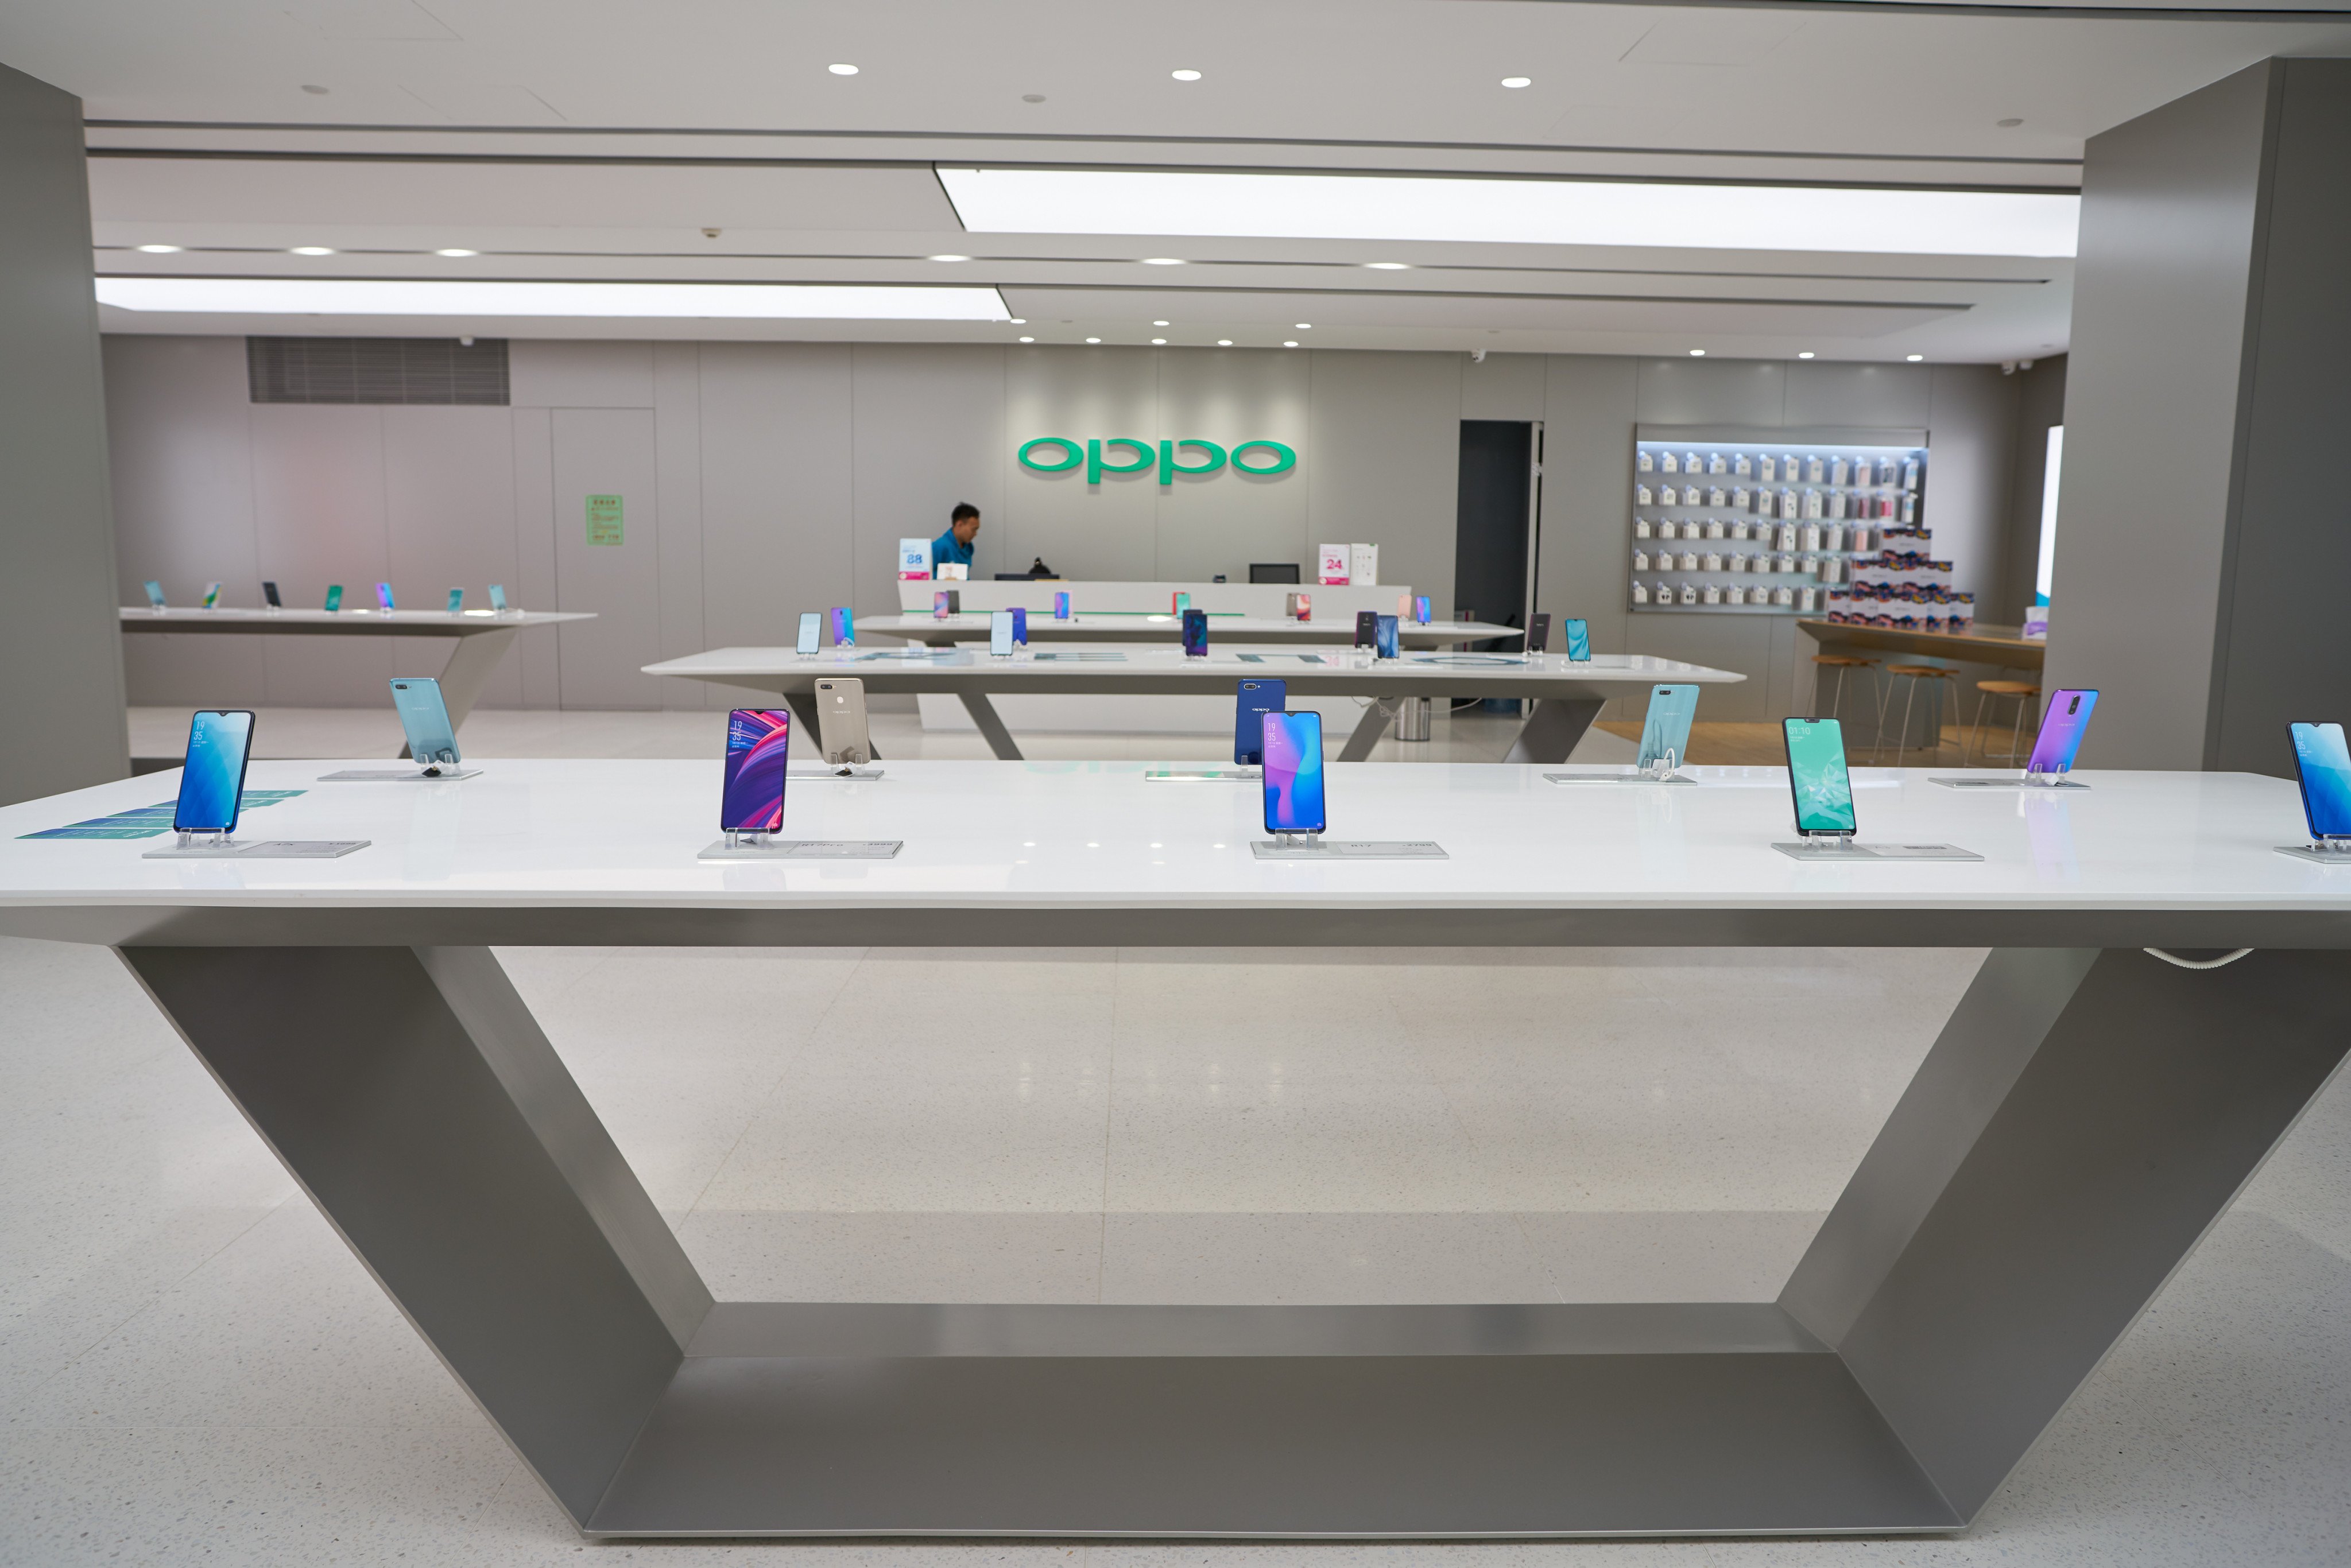 An Oppo shop at the China International Consumer Electronics Exchange/Exhibition Centre (CEEC) in Shenzhen seen in April 2019. Photo: Shutterstock